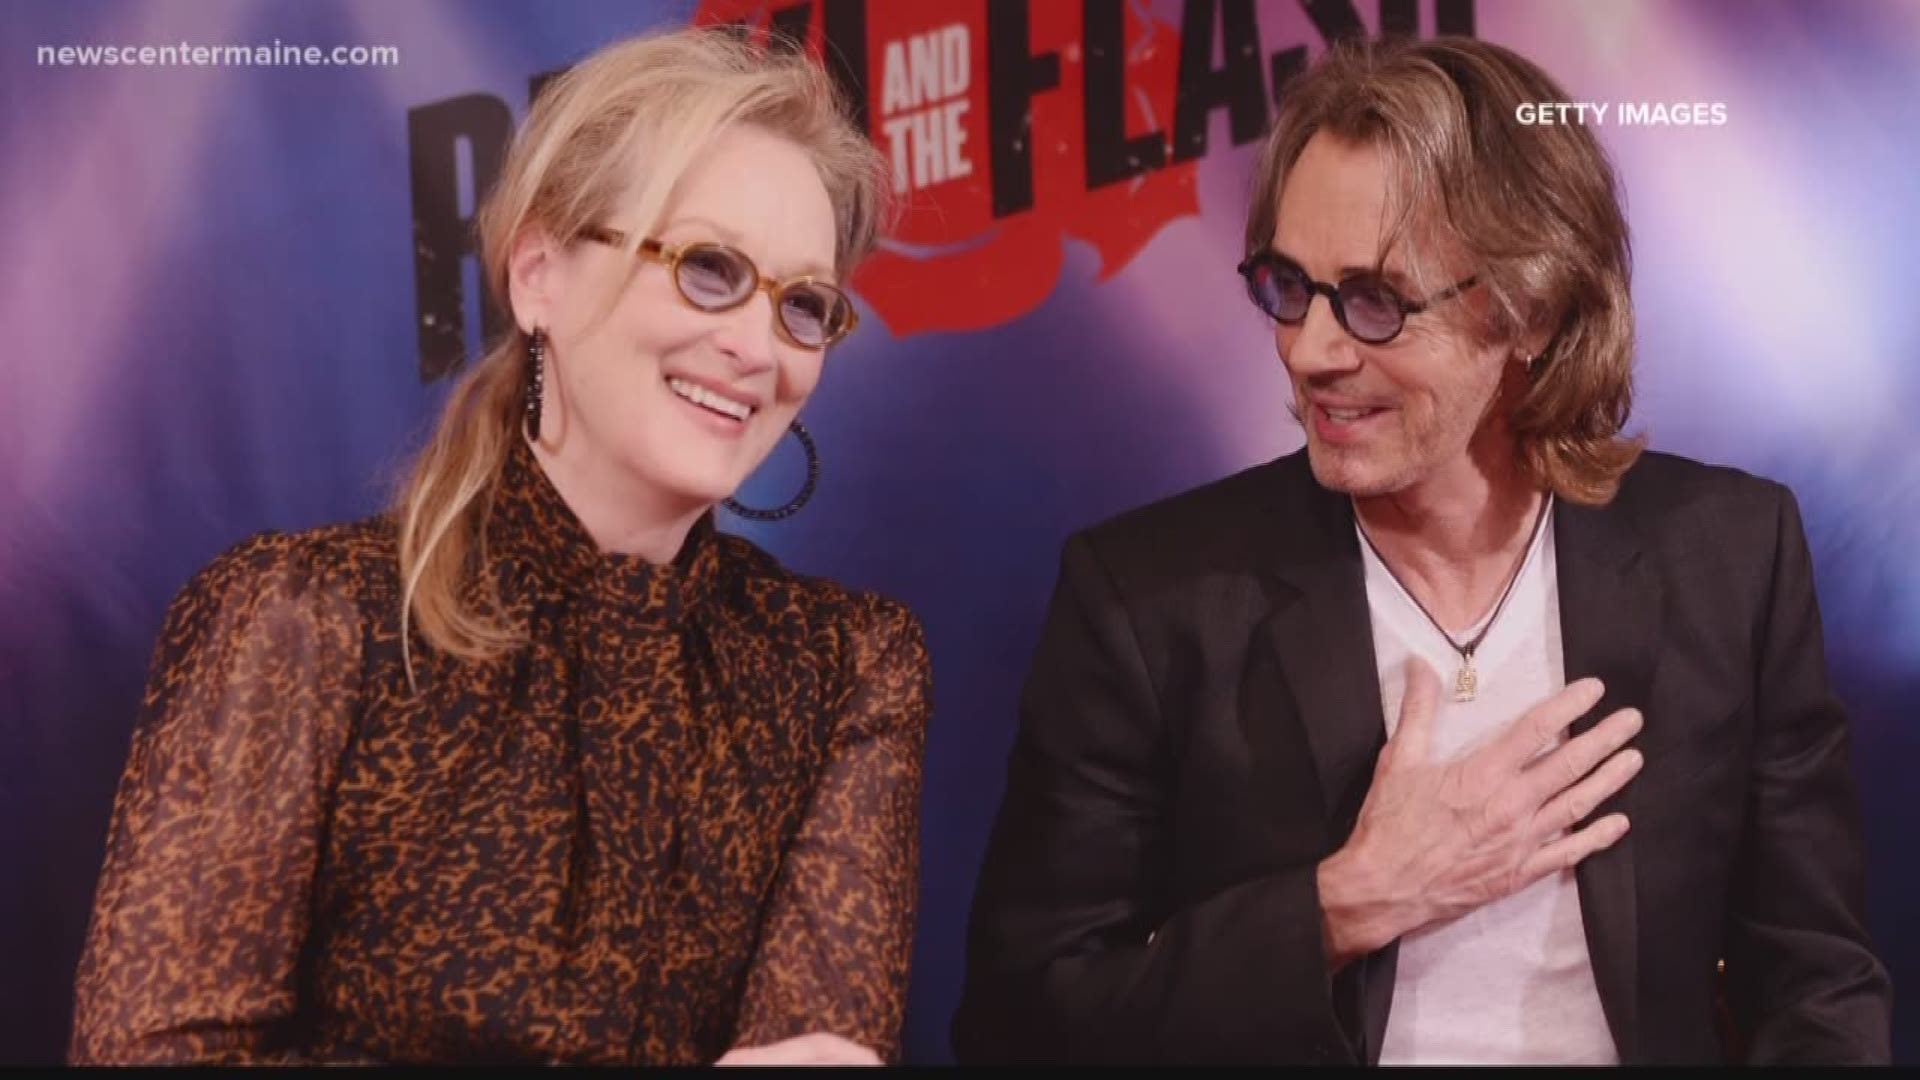 While working on the movie "Ricky and the Flash," Meryl Streep would listen to Springfield play guitar and request more songs. Springfield said "she says it's the most fun she's ever had on the set..."